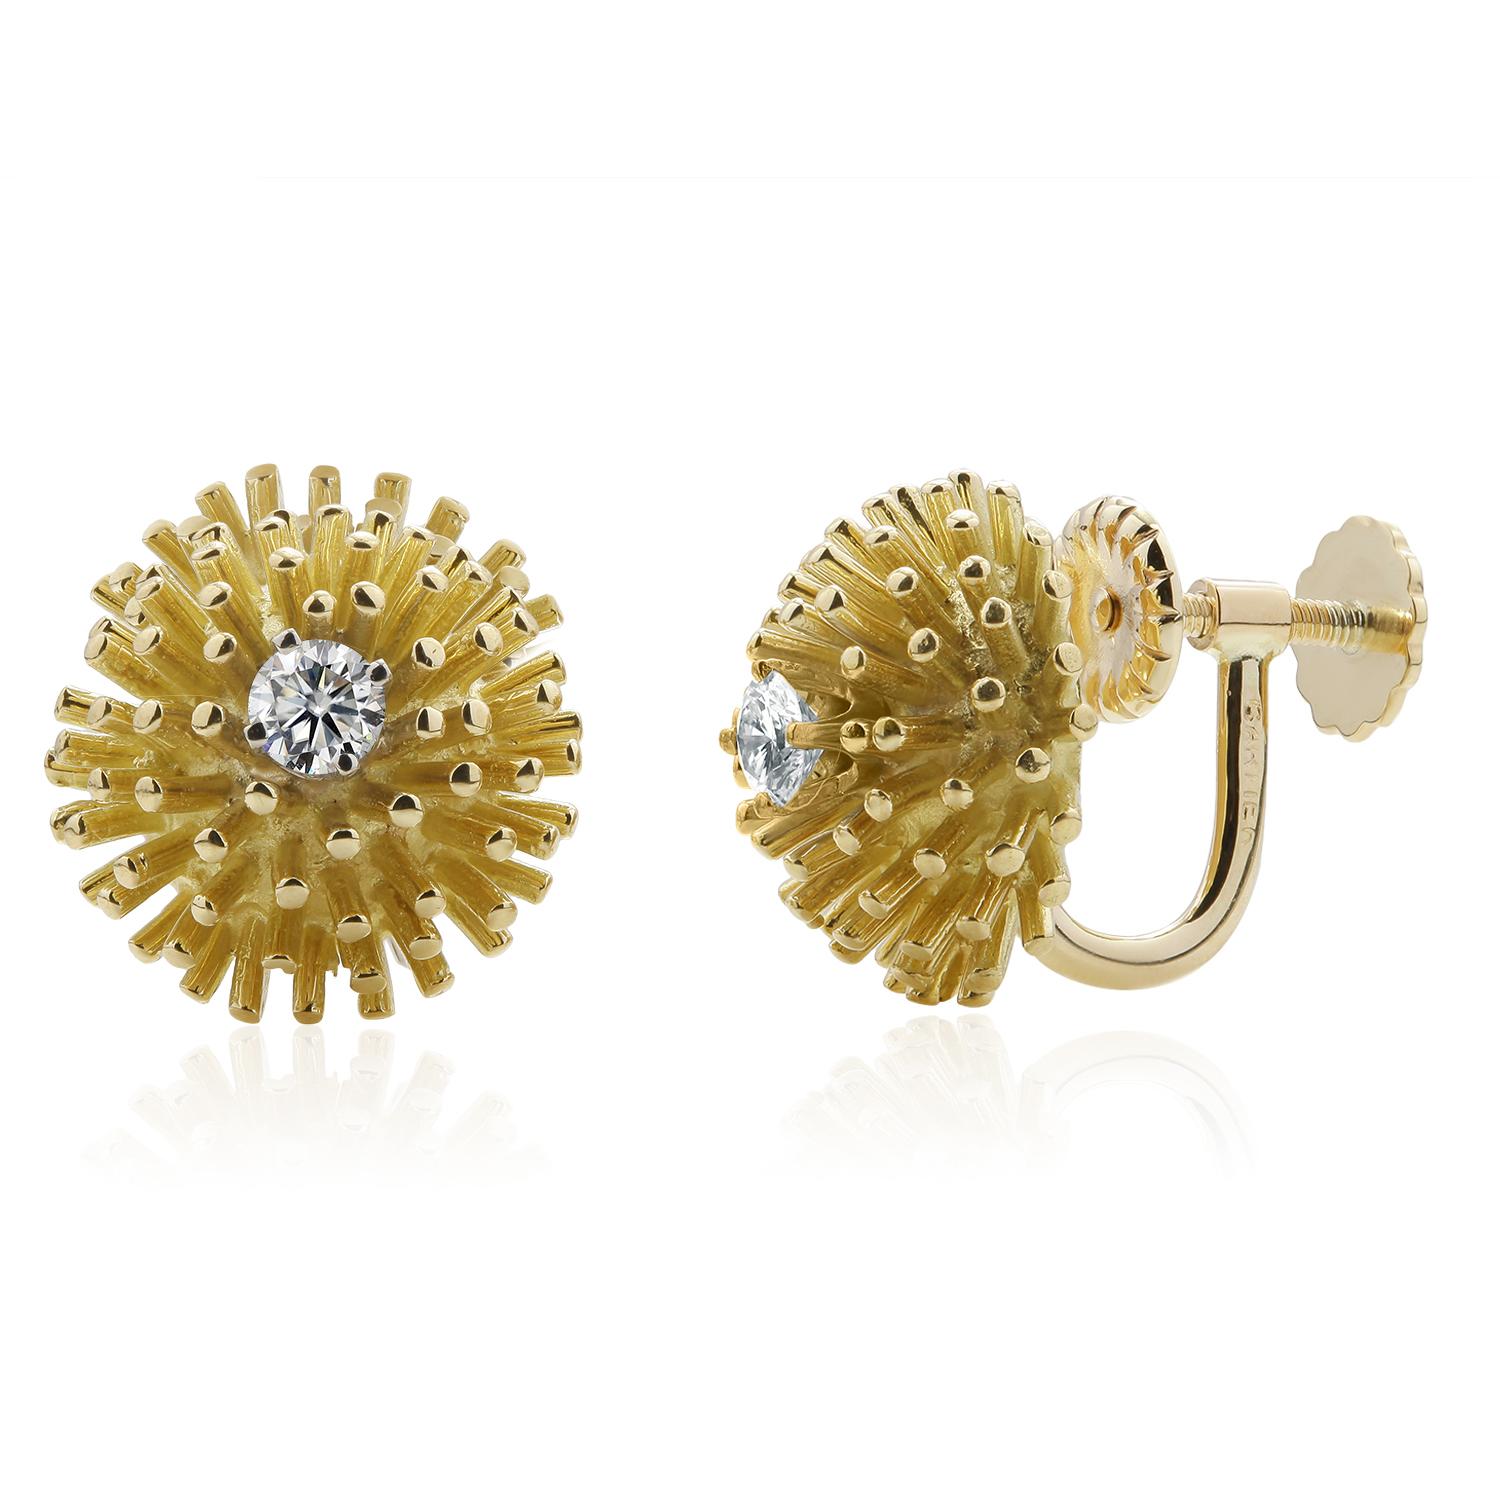 Brilliant Cut Vintage Cartier Yellow Gold Spiked Design Half Dome Diamond 0.40 Carat Earrings  For Sale